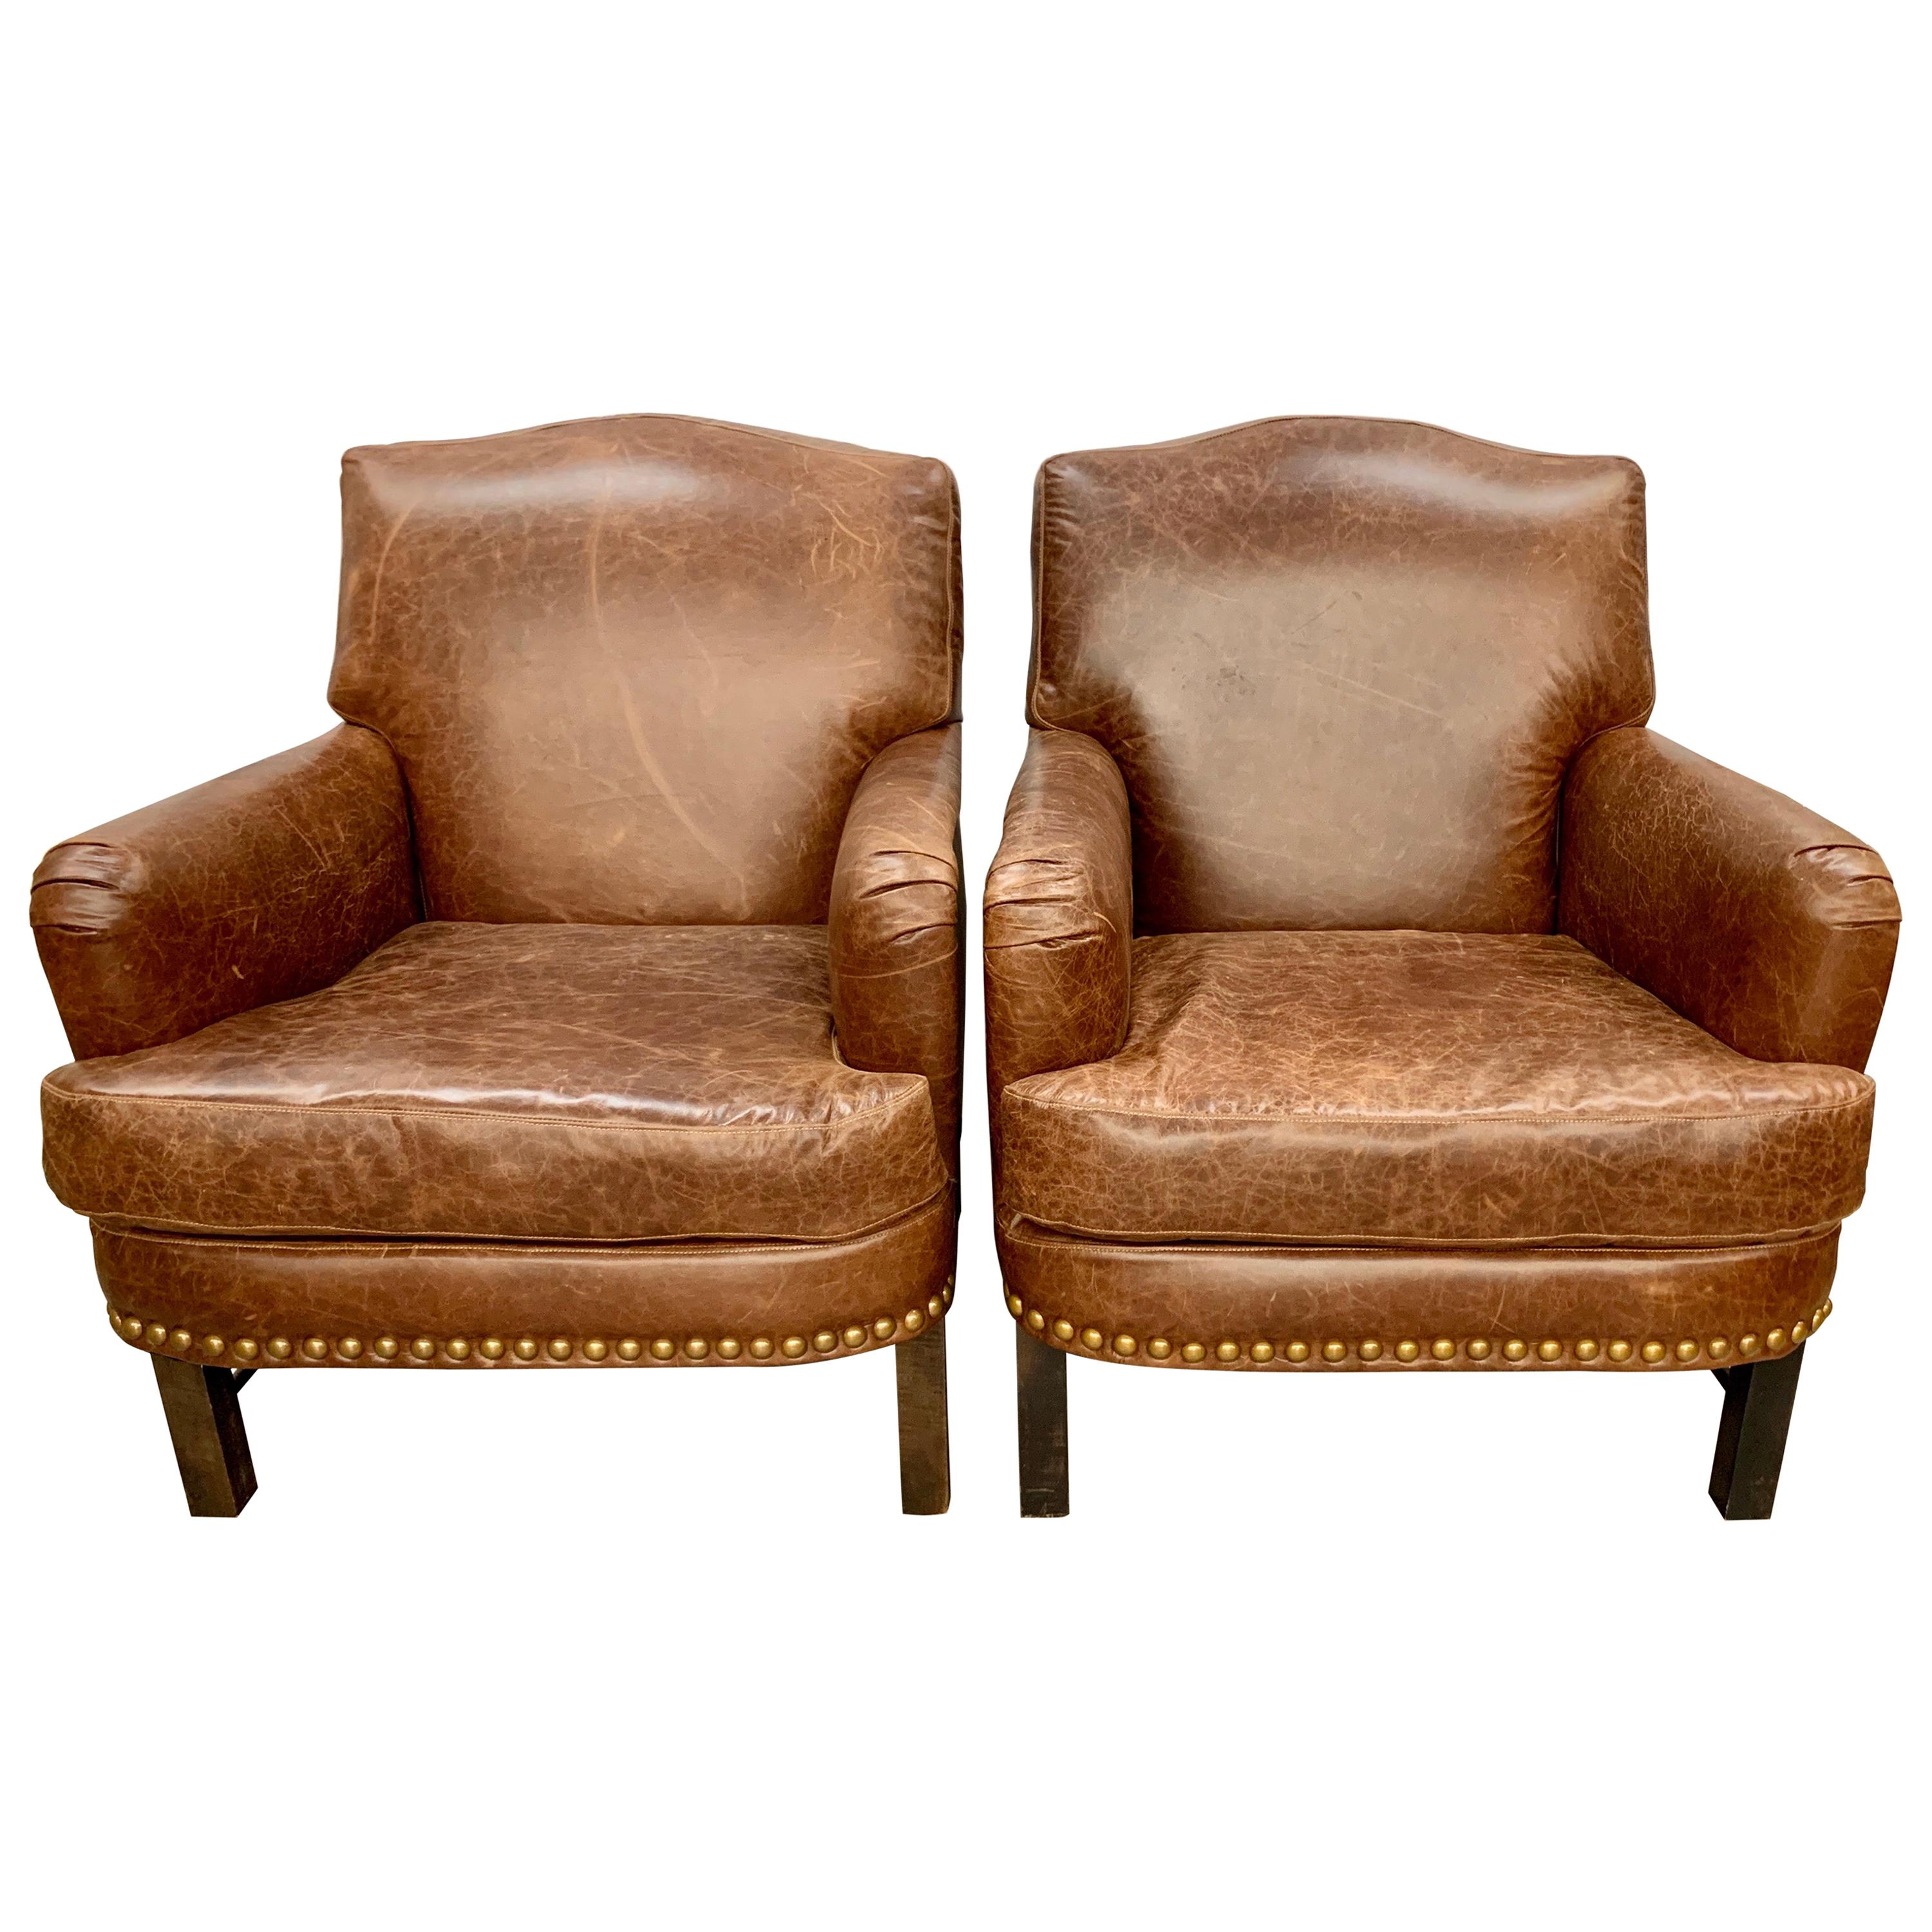 Pair of Matching Brown Leather Nailhead Club Chairs